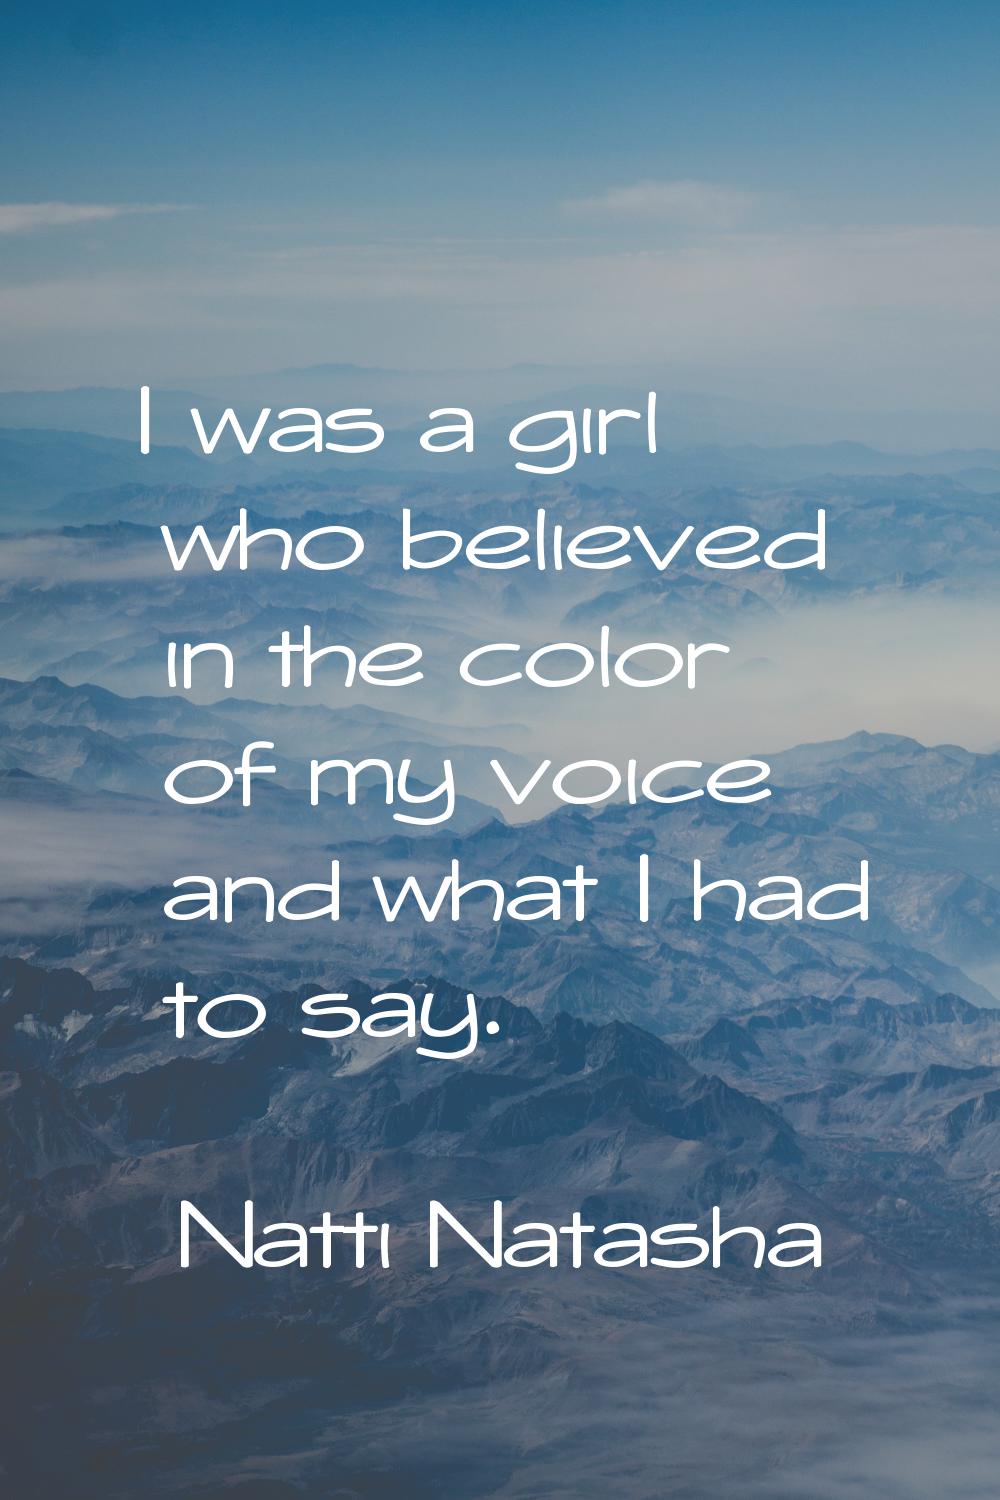 I was a girl who believed in the color of my voice and what I had to say.